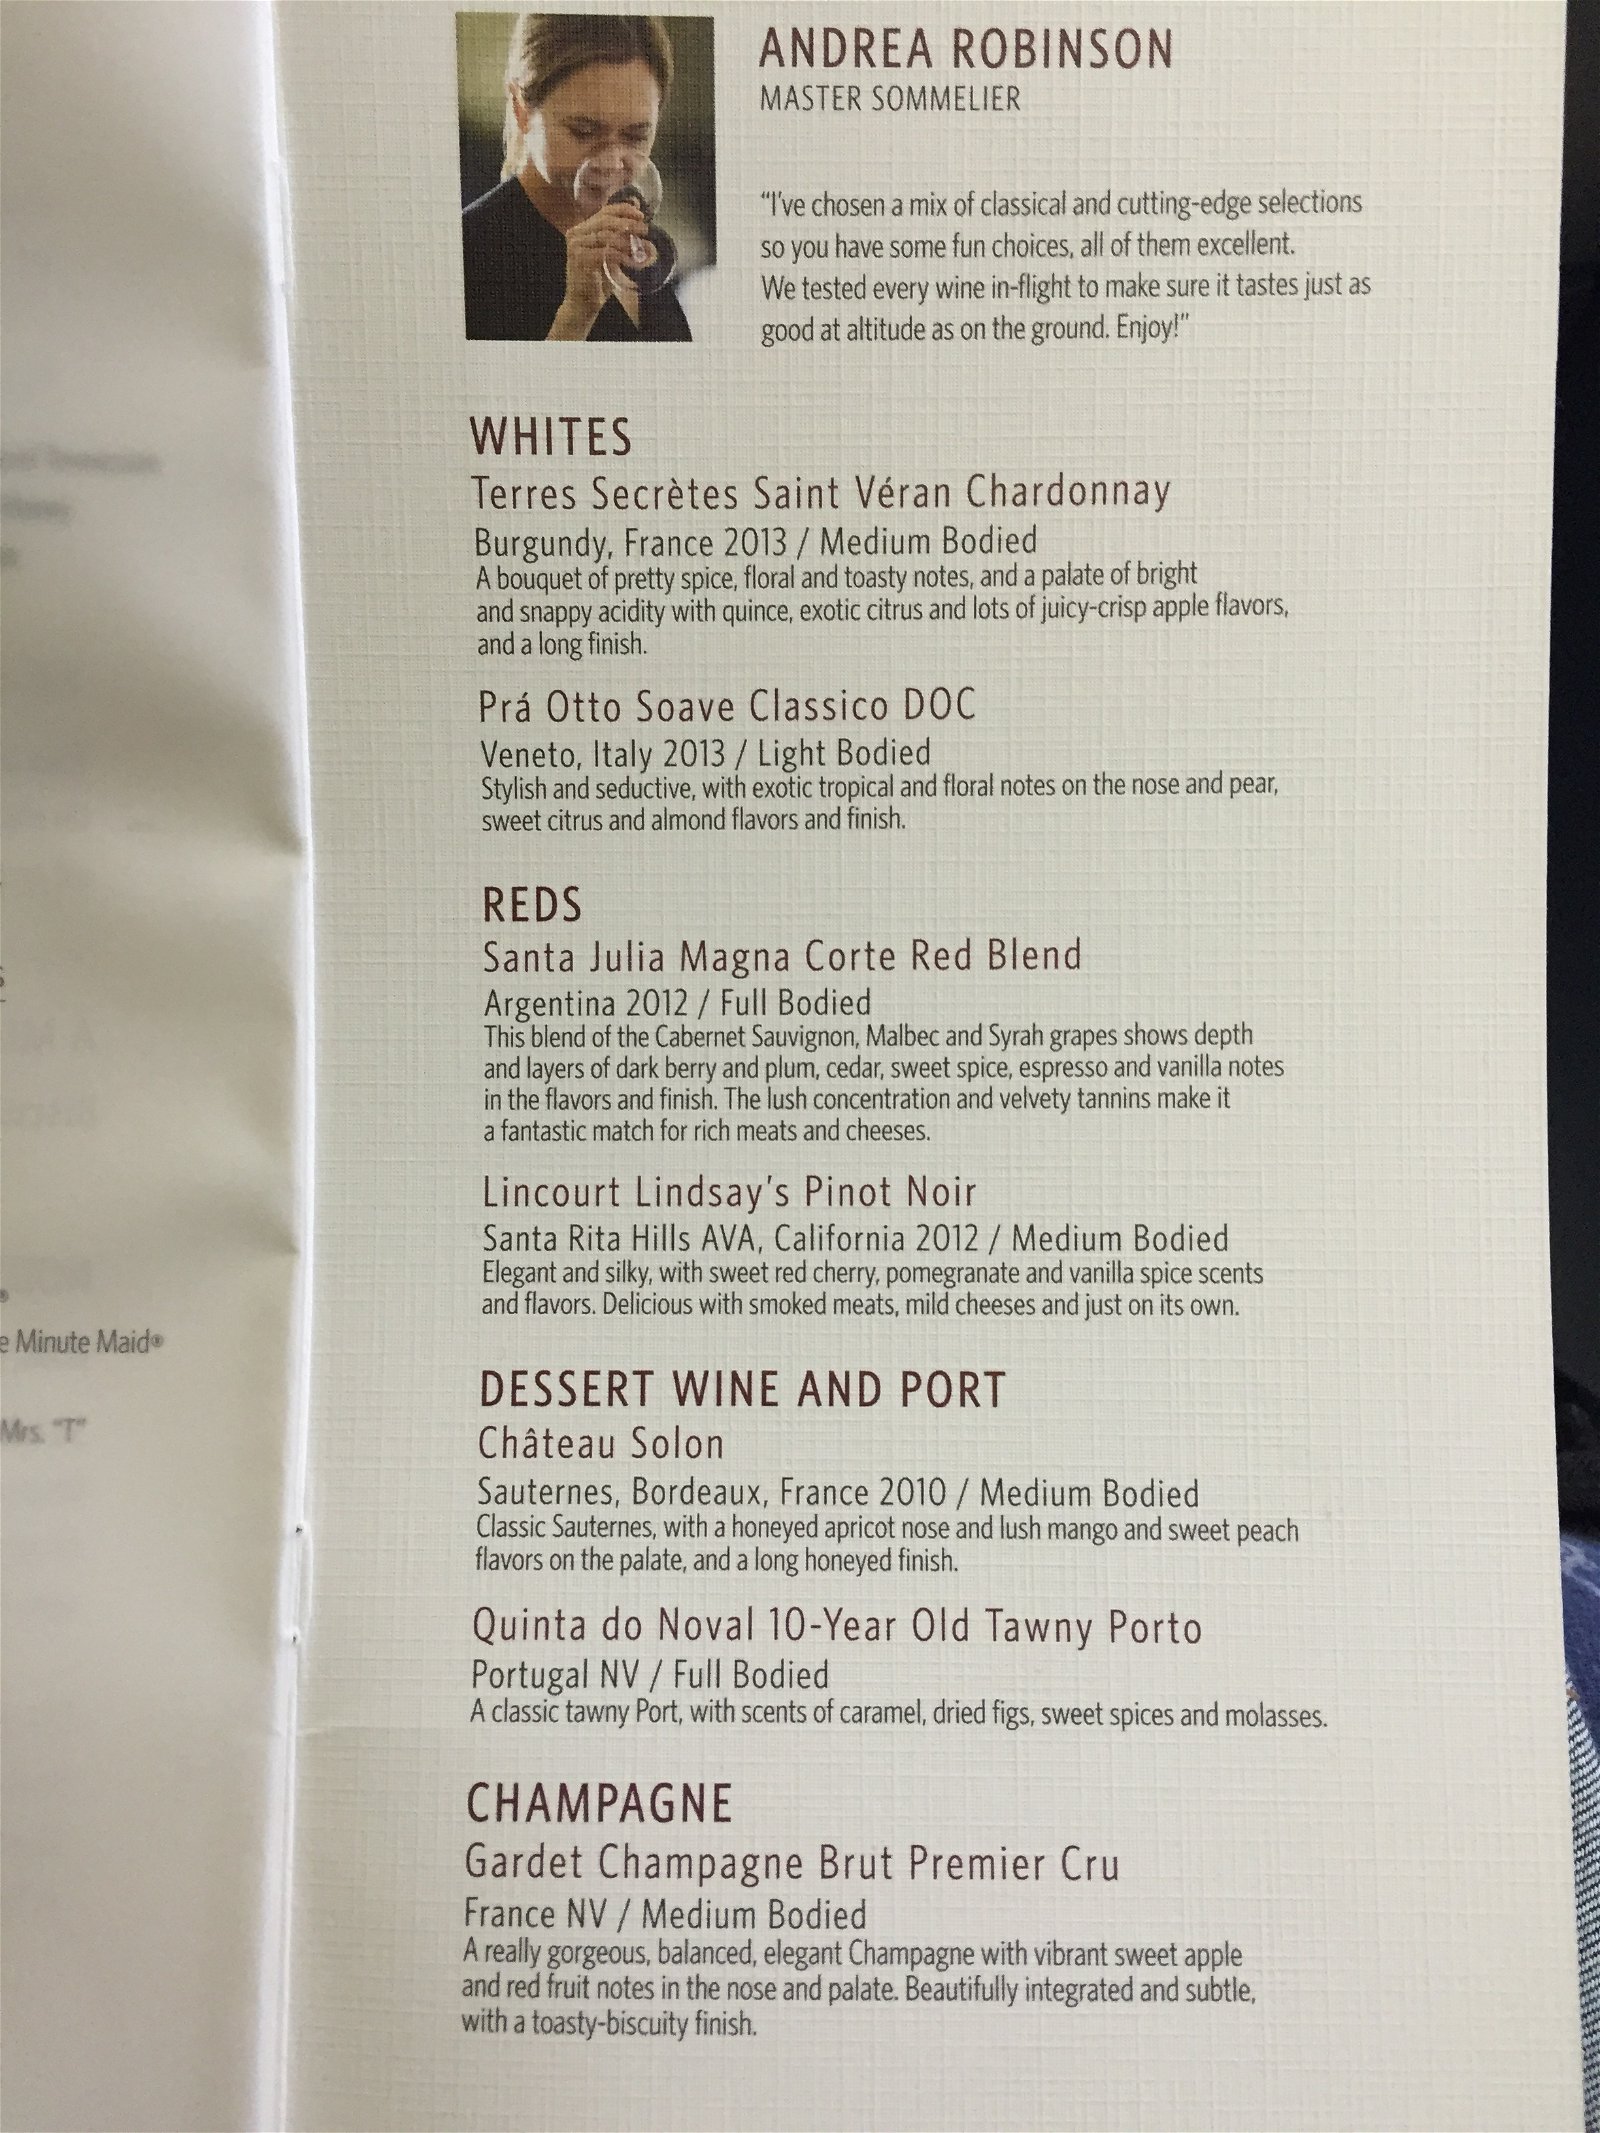 Delta's wine list, except that they don't serve the Gardet on the ground - they serve cava instead